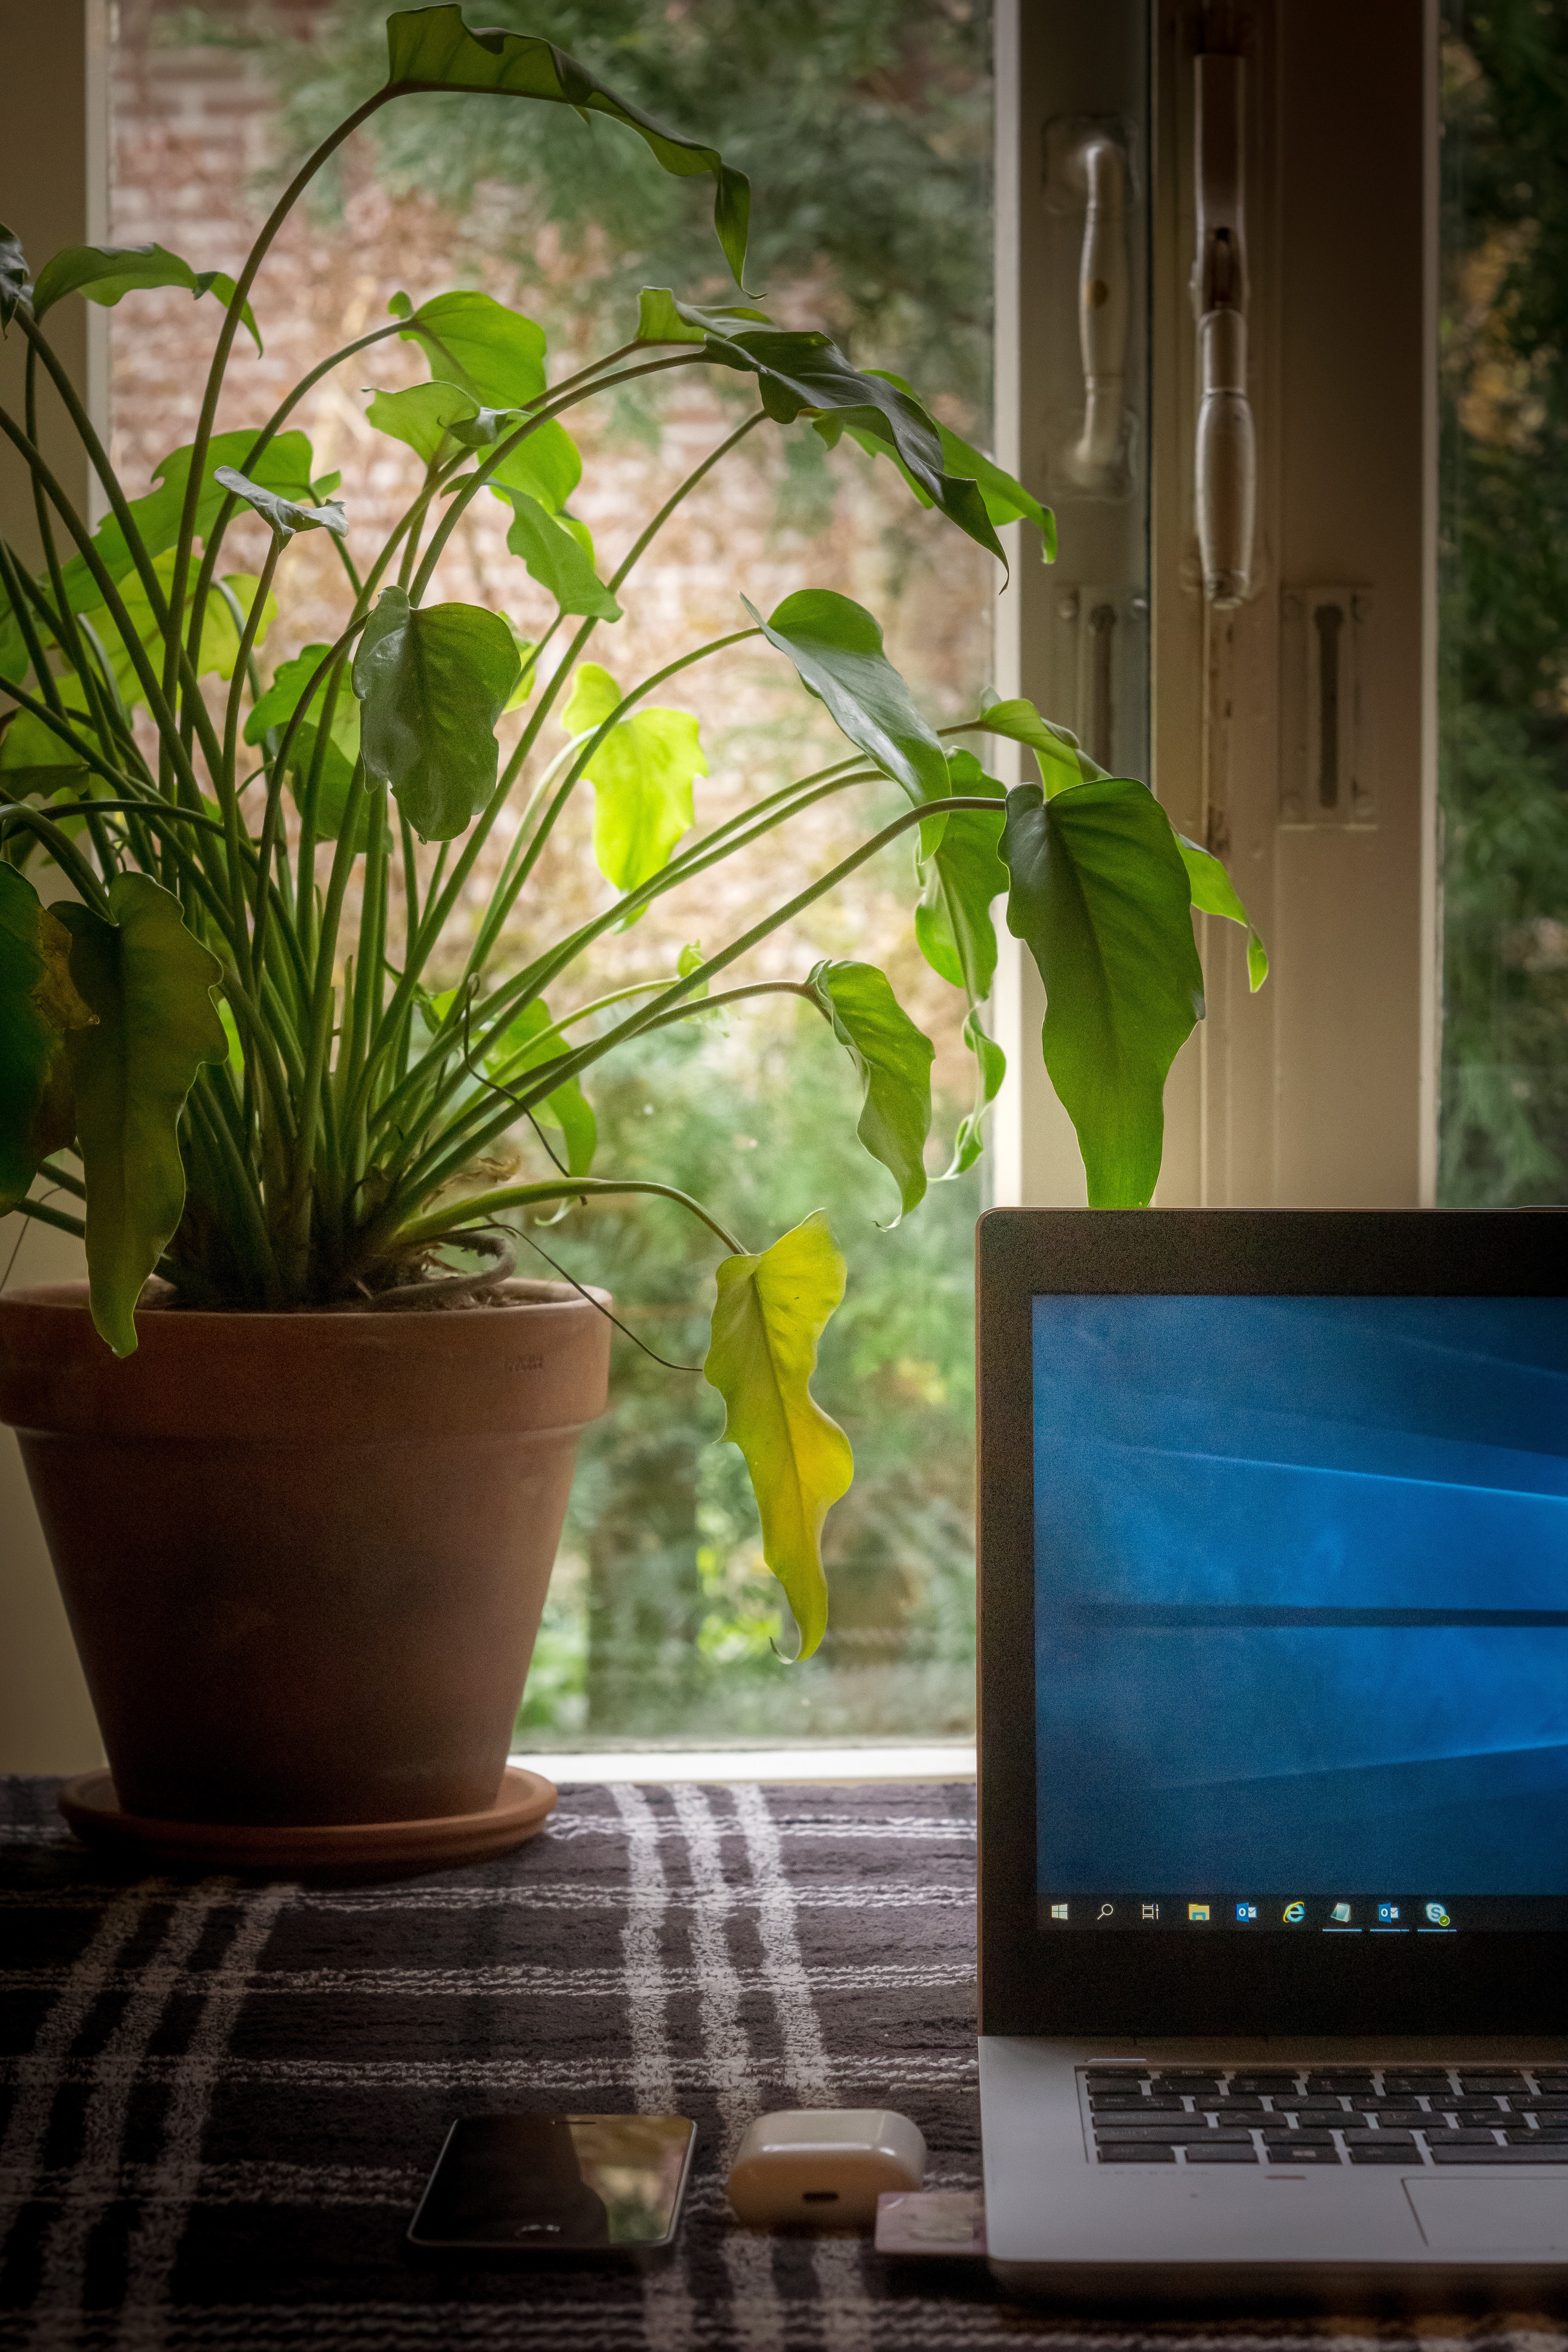 Laptop and house plant